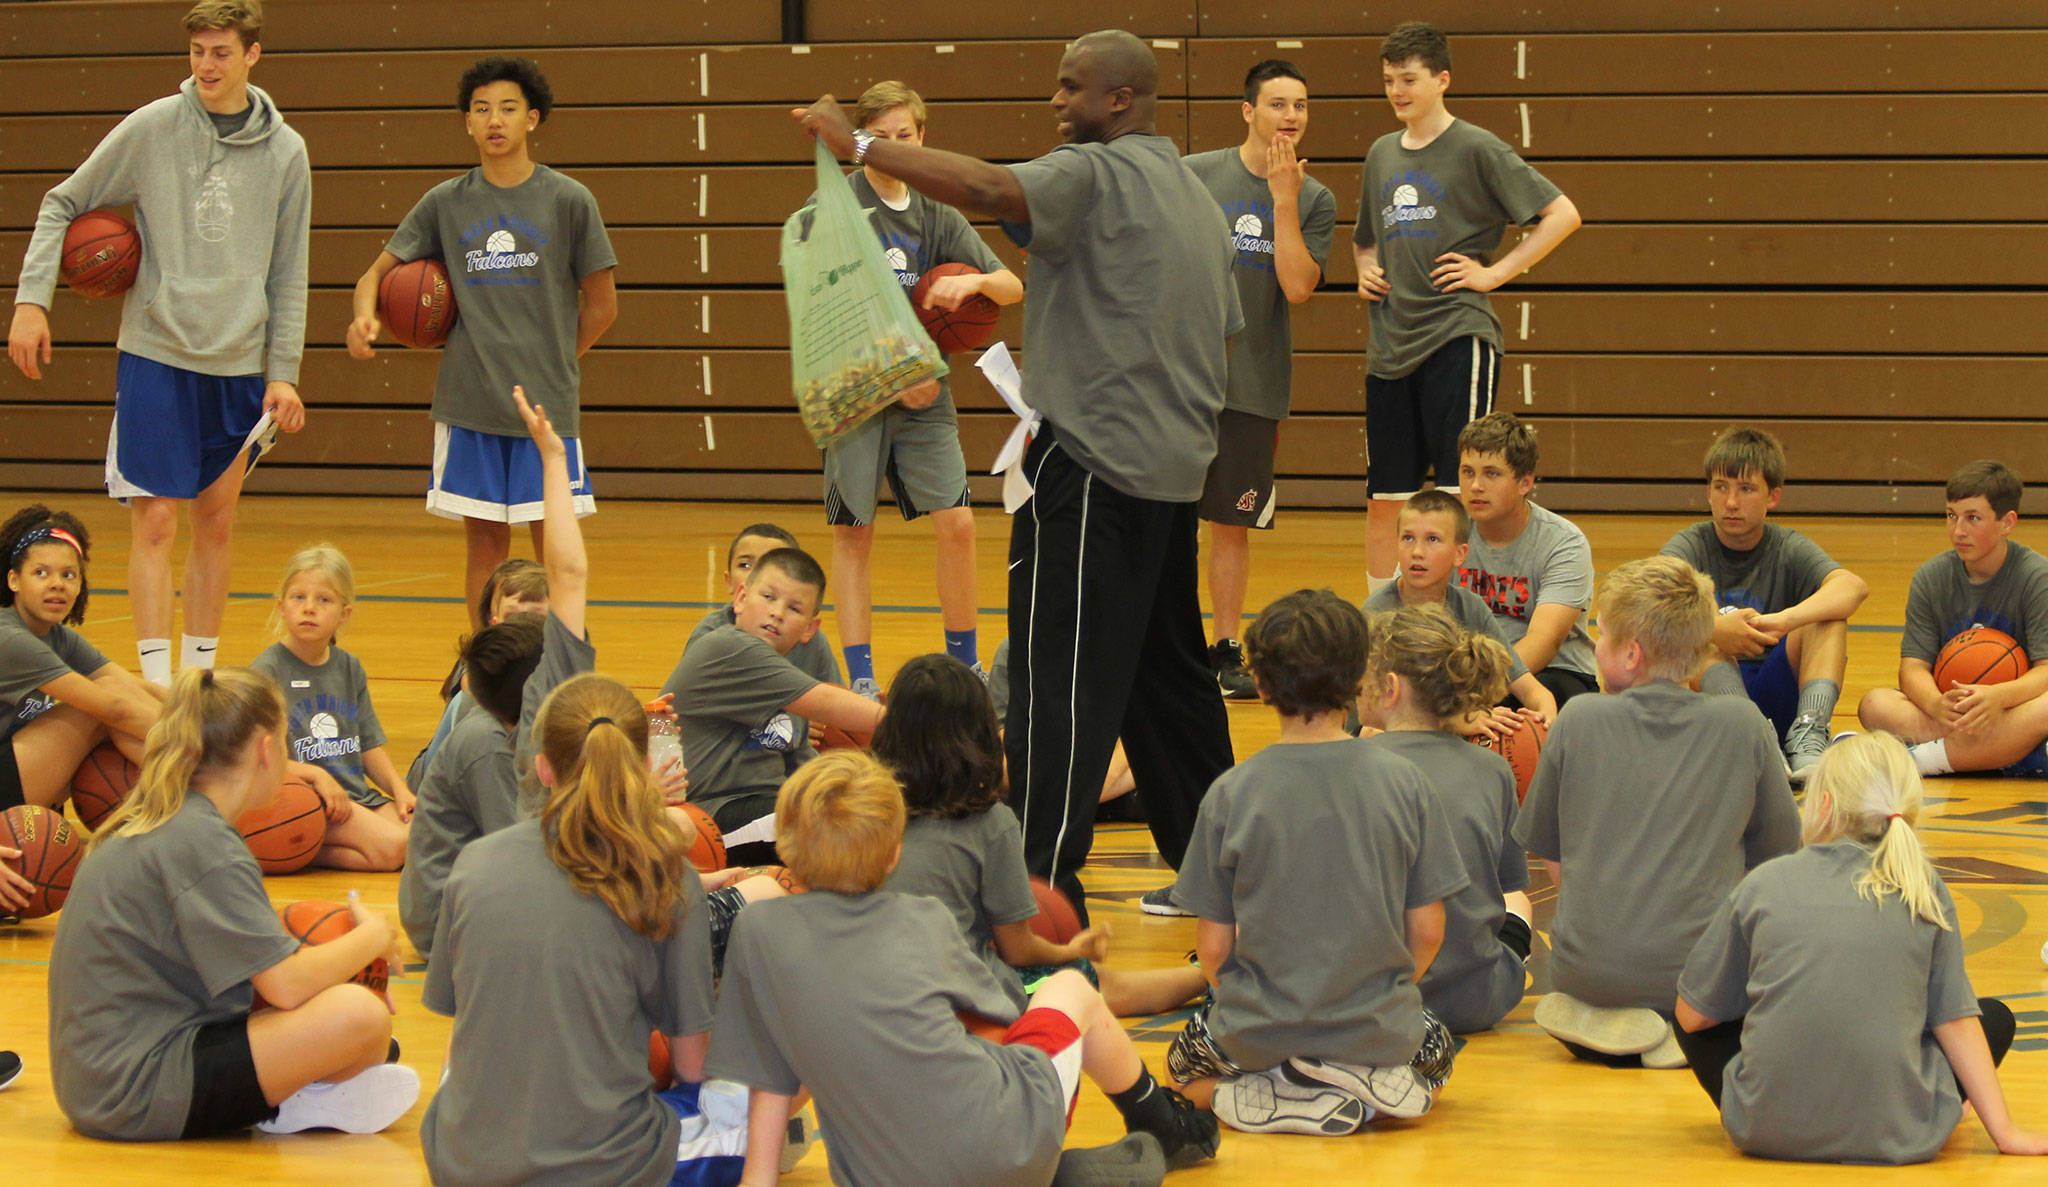 South Whidbey High School boys basketball coach offers candy to campers who can demonstrate specific skills.(Photo by Jim Waller/South Whidbey Record)